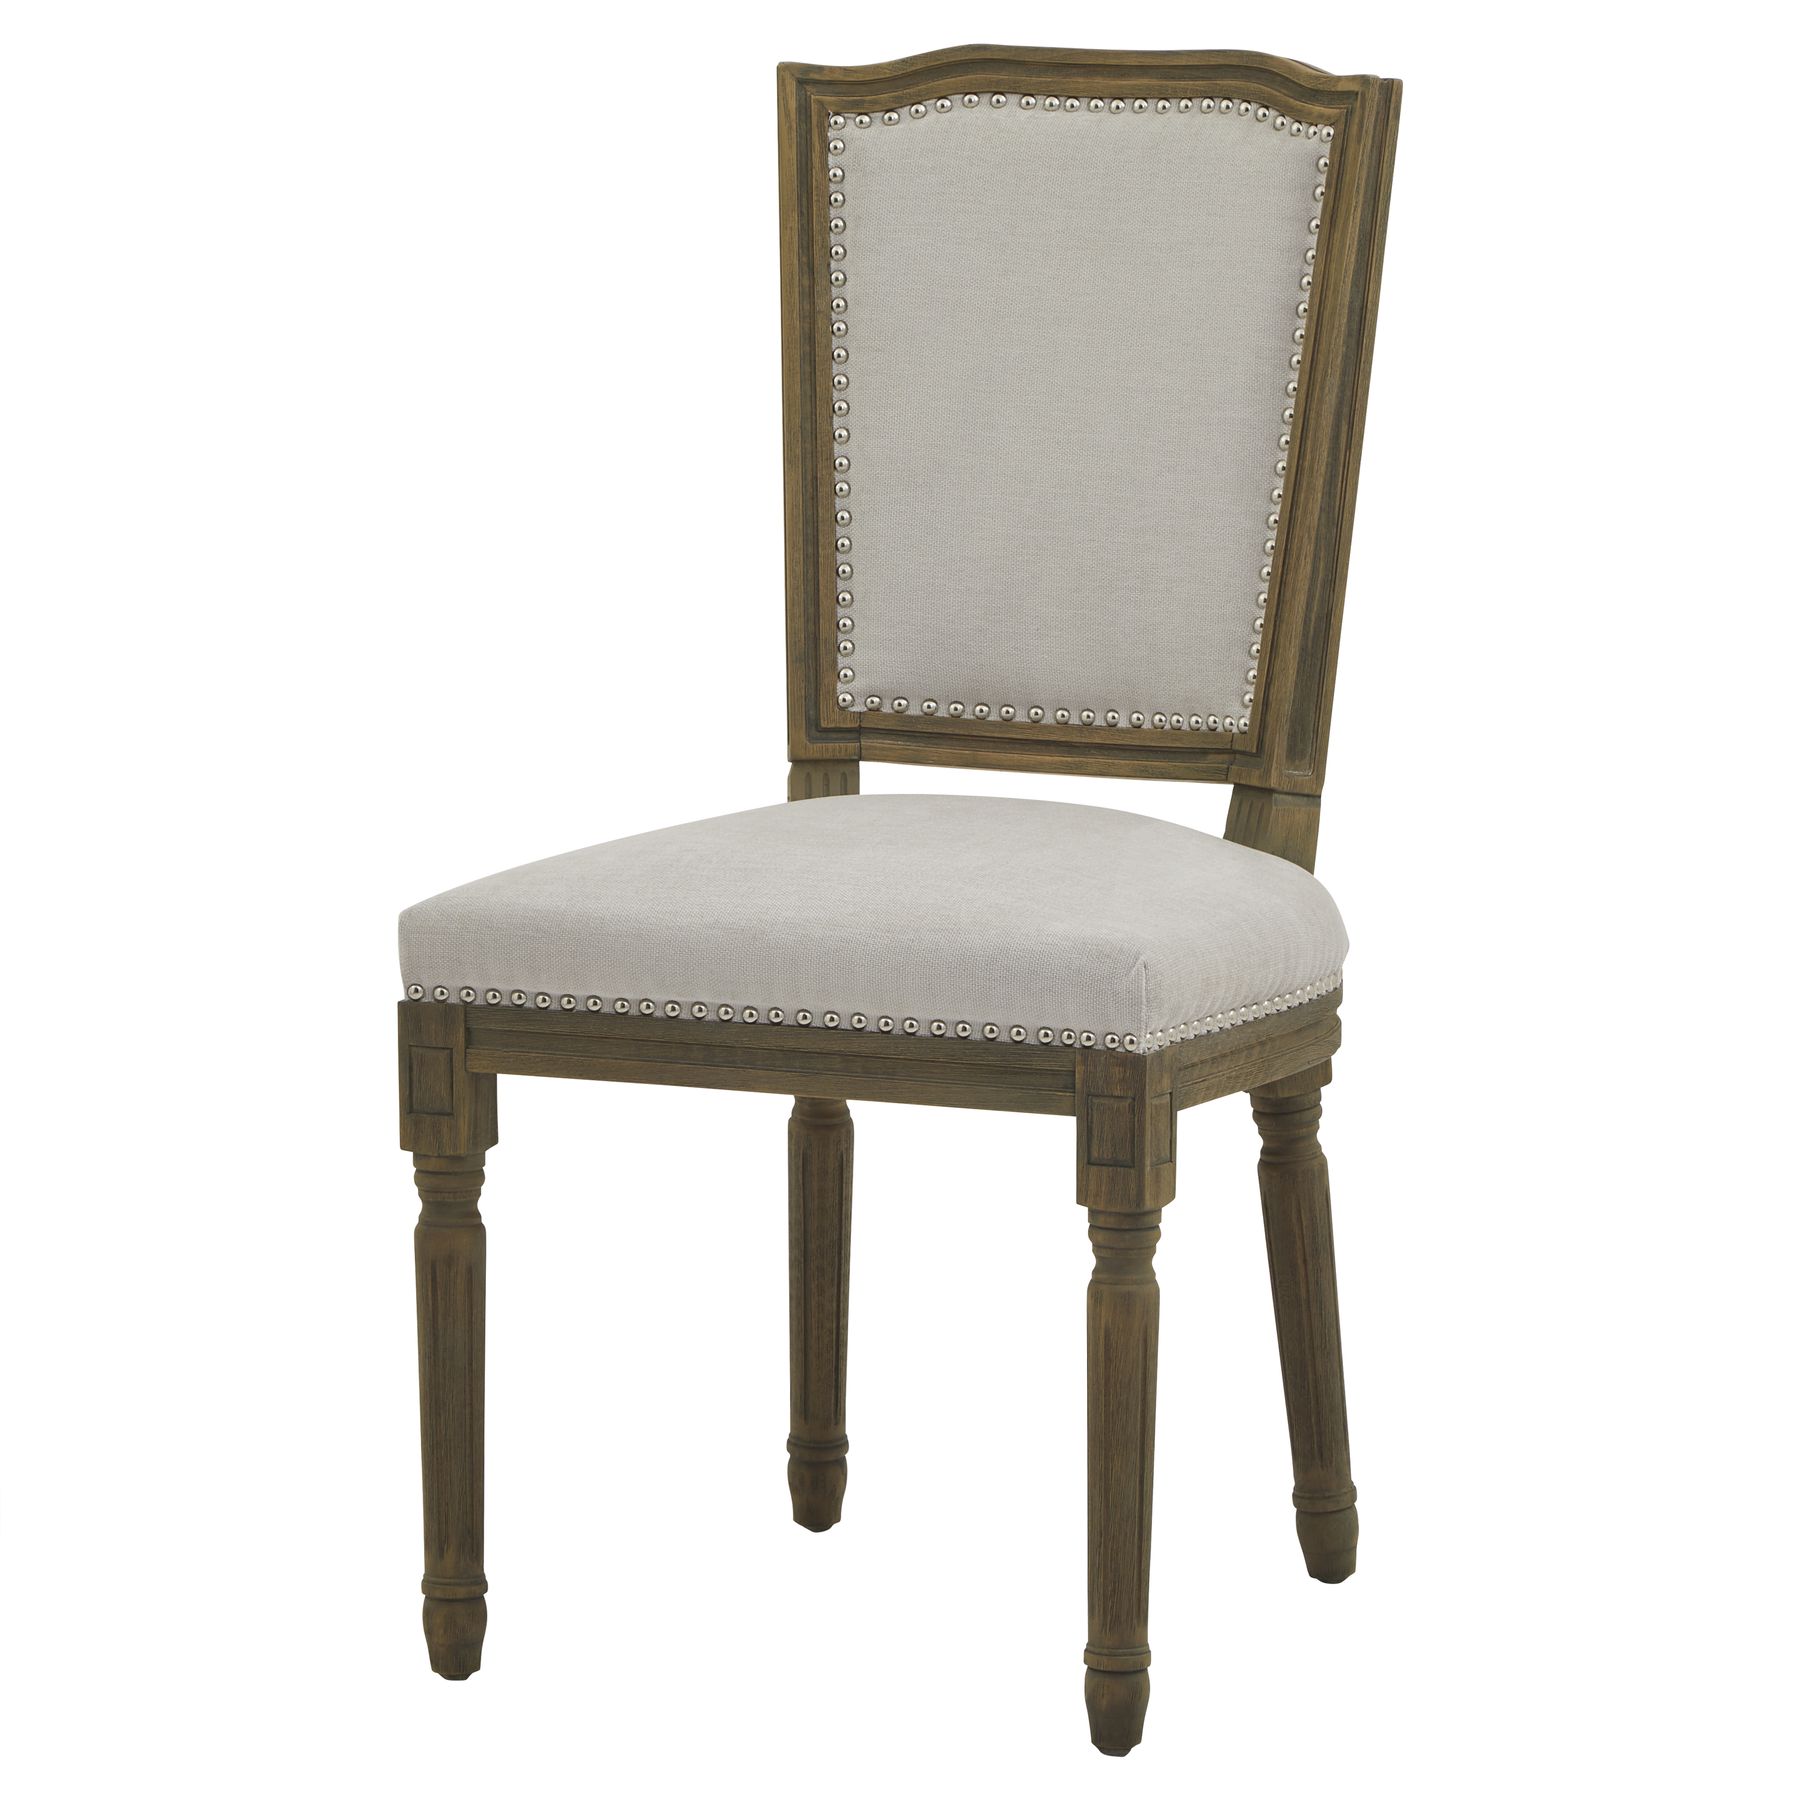 Ripley Grey Dining Chair - Image 1